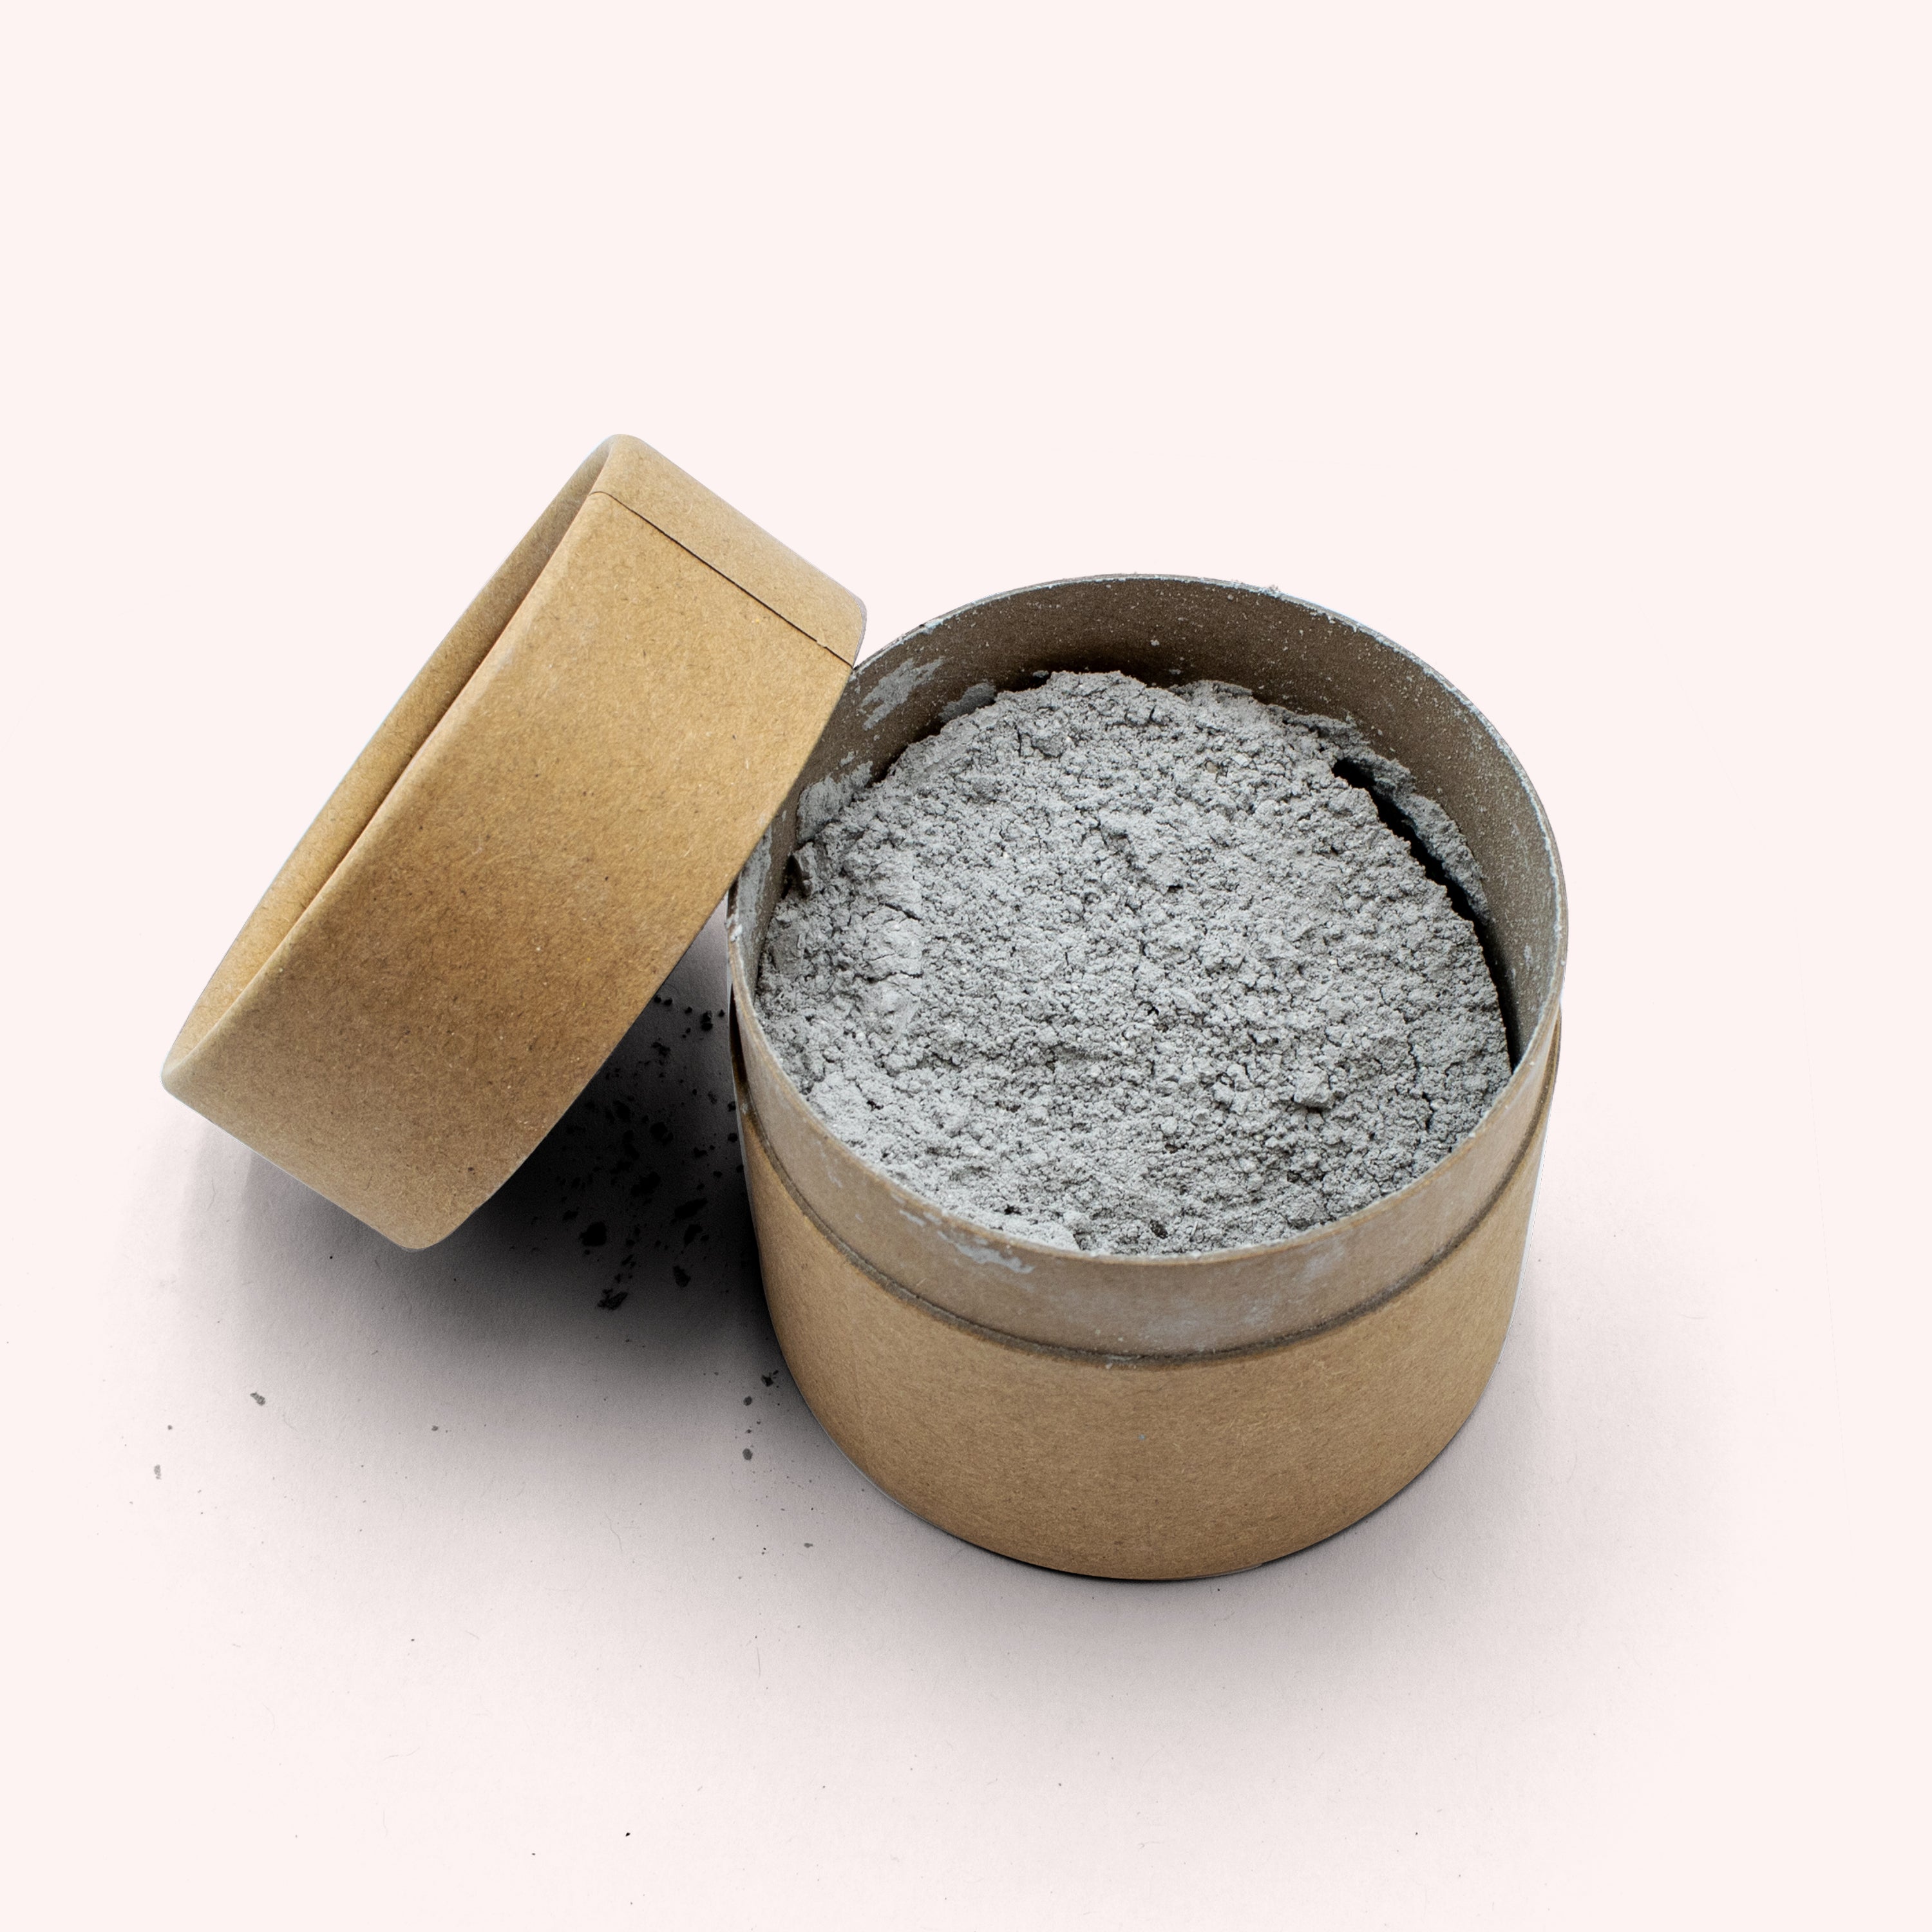 Cleansing & Calming Charcoal Facial Masque With Tea Tree